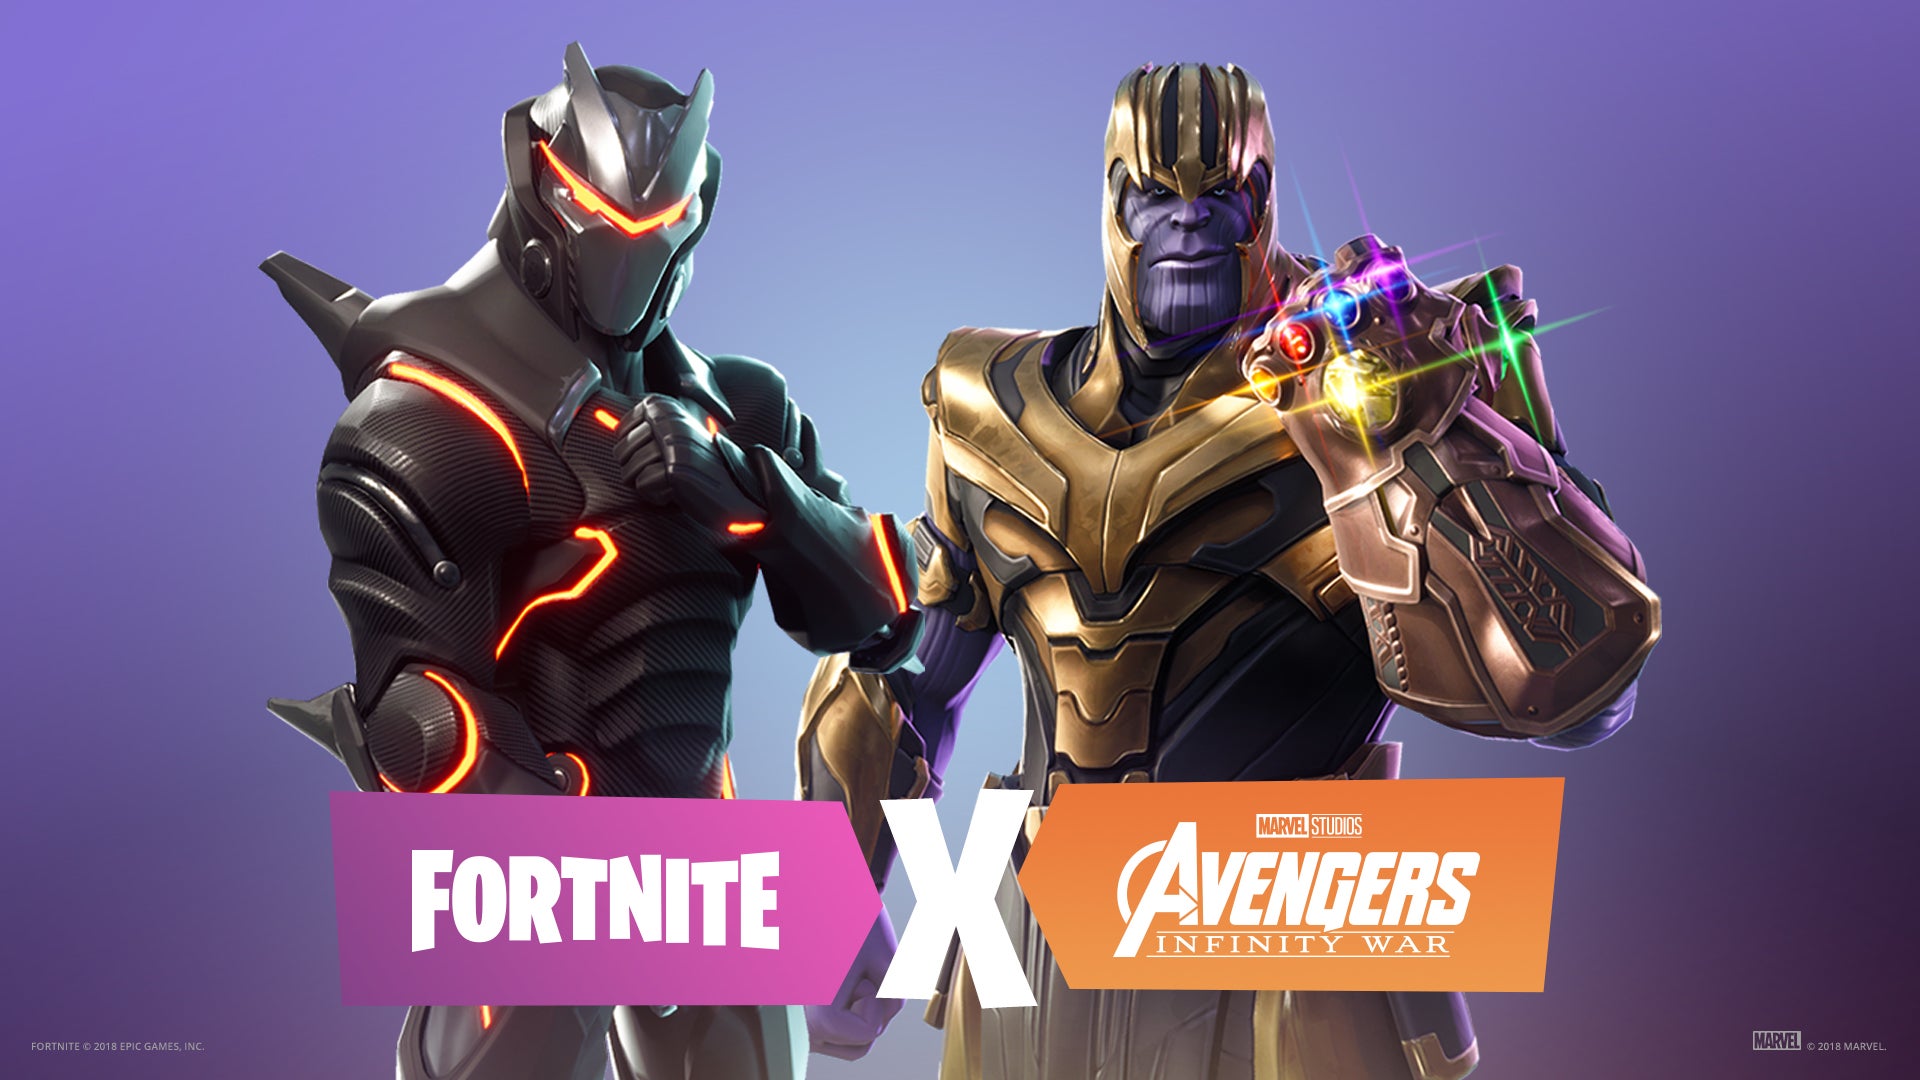 Image for Thanos gets less health and more power in Fortnite’s latest patch